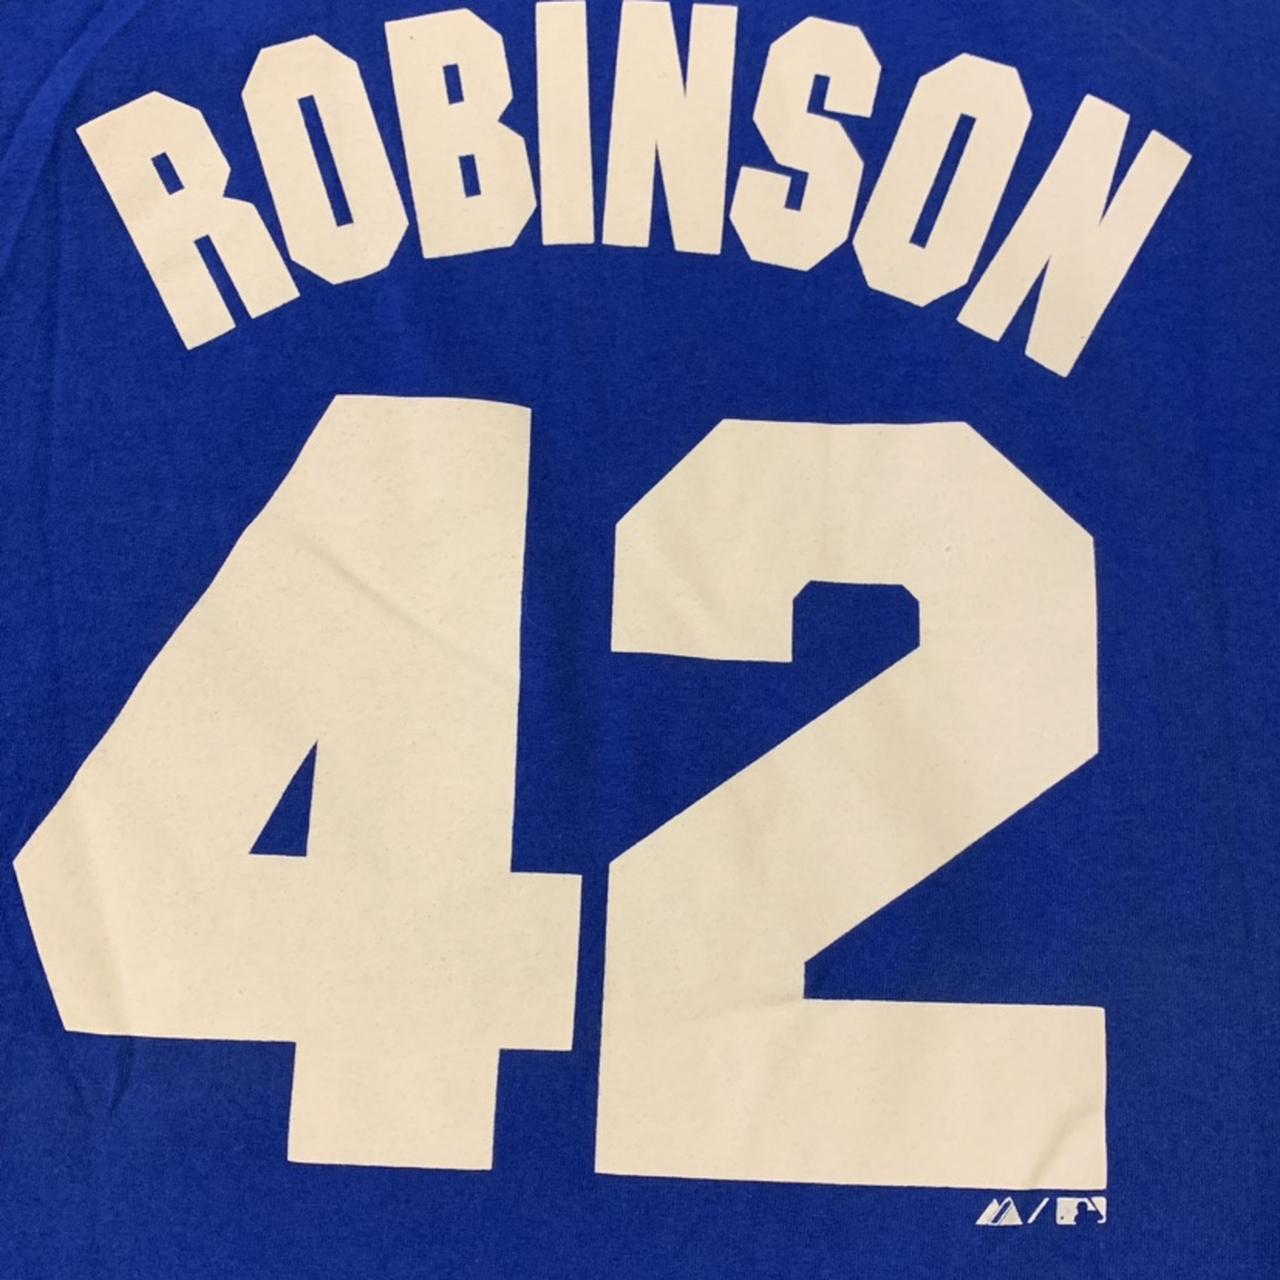 Vintage 1955 Jackie Robinson jersey made by Mitchell - Depop